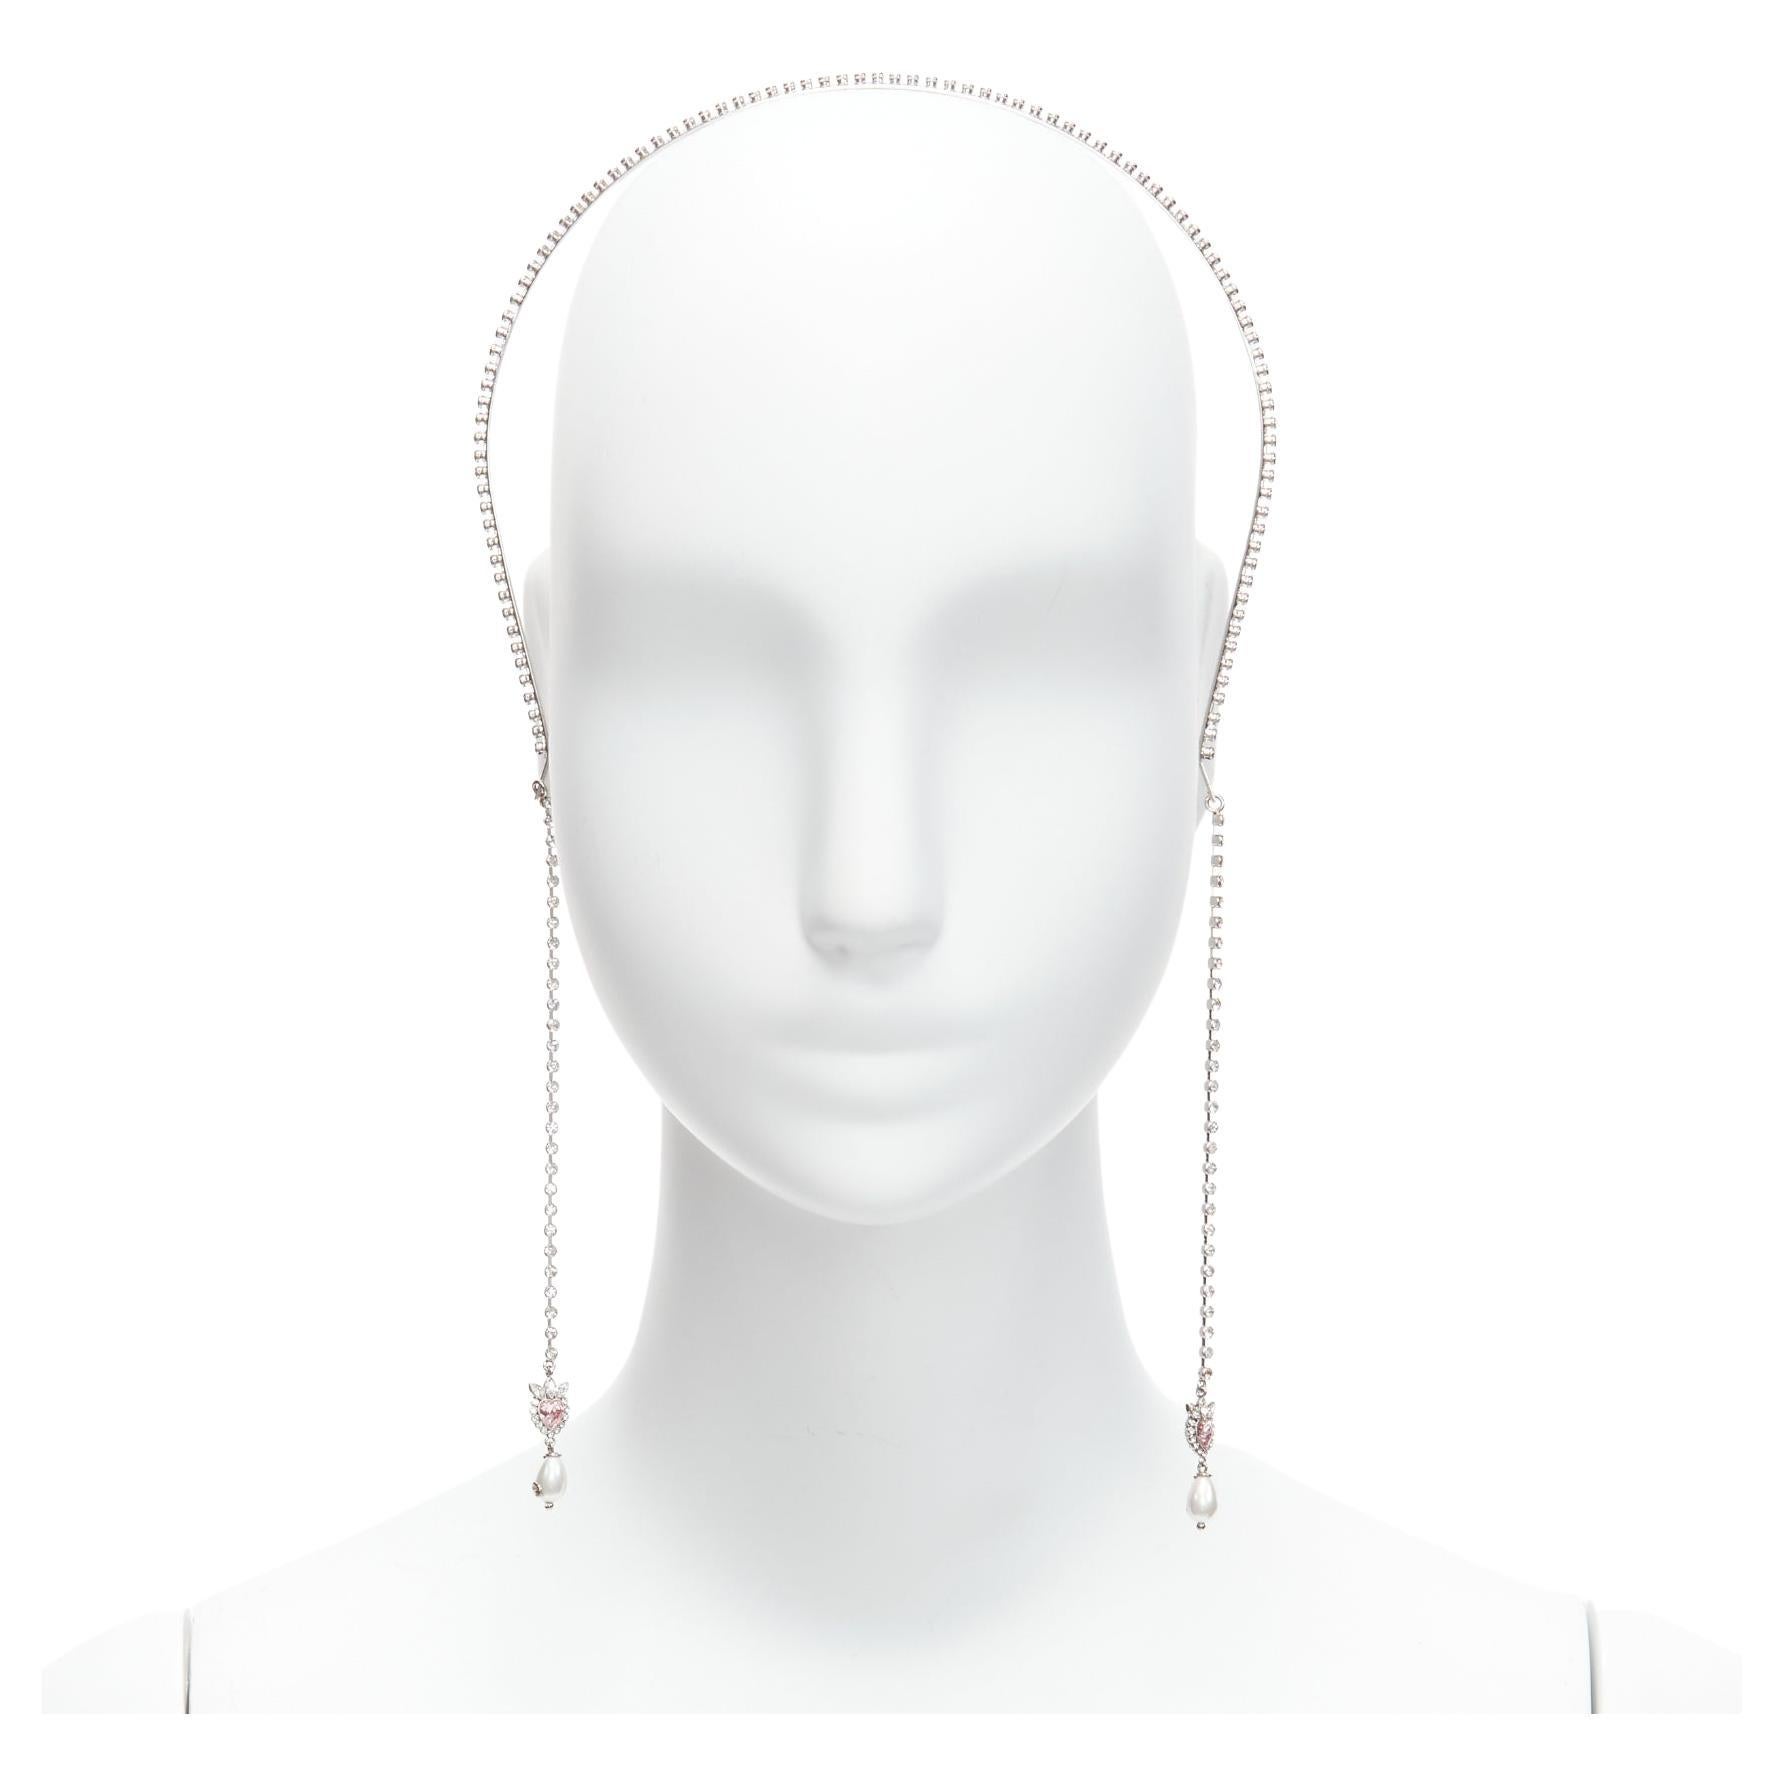 GUCCI Alessandro Michele pink heart crystal logo pearl dangling charm hairband For Sale